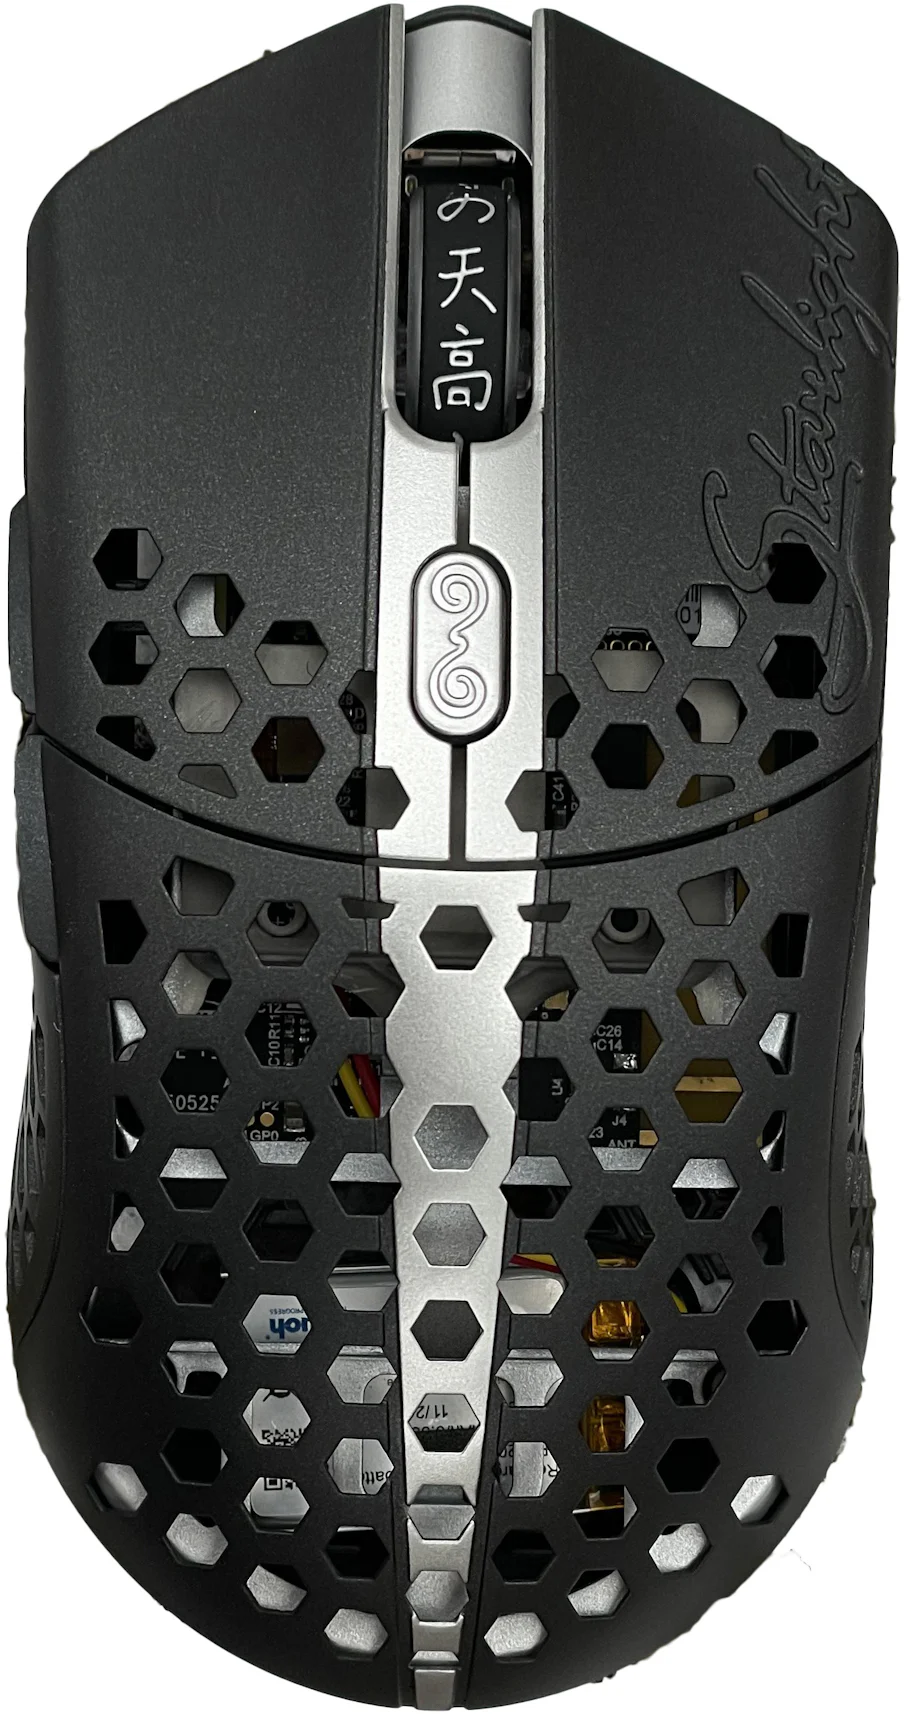 Finalmouse The Last Legend Wireless Mouse (Centerpiece Founders Edition  Access Card Included) Black - US